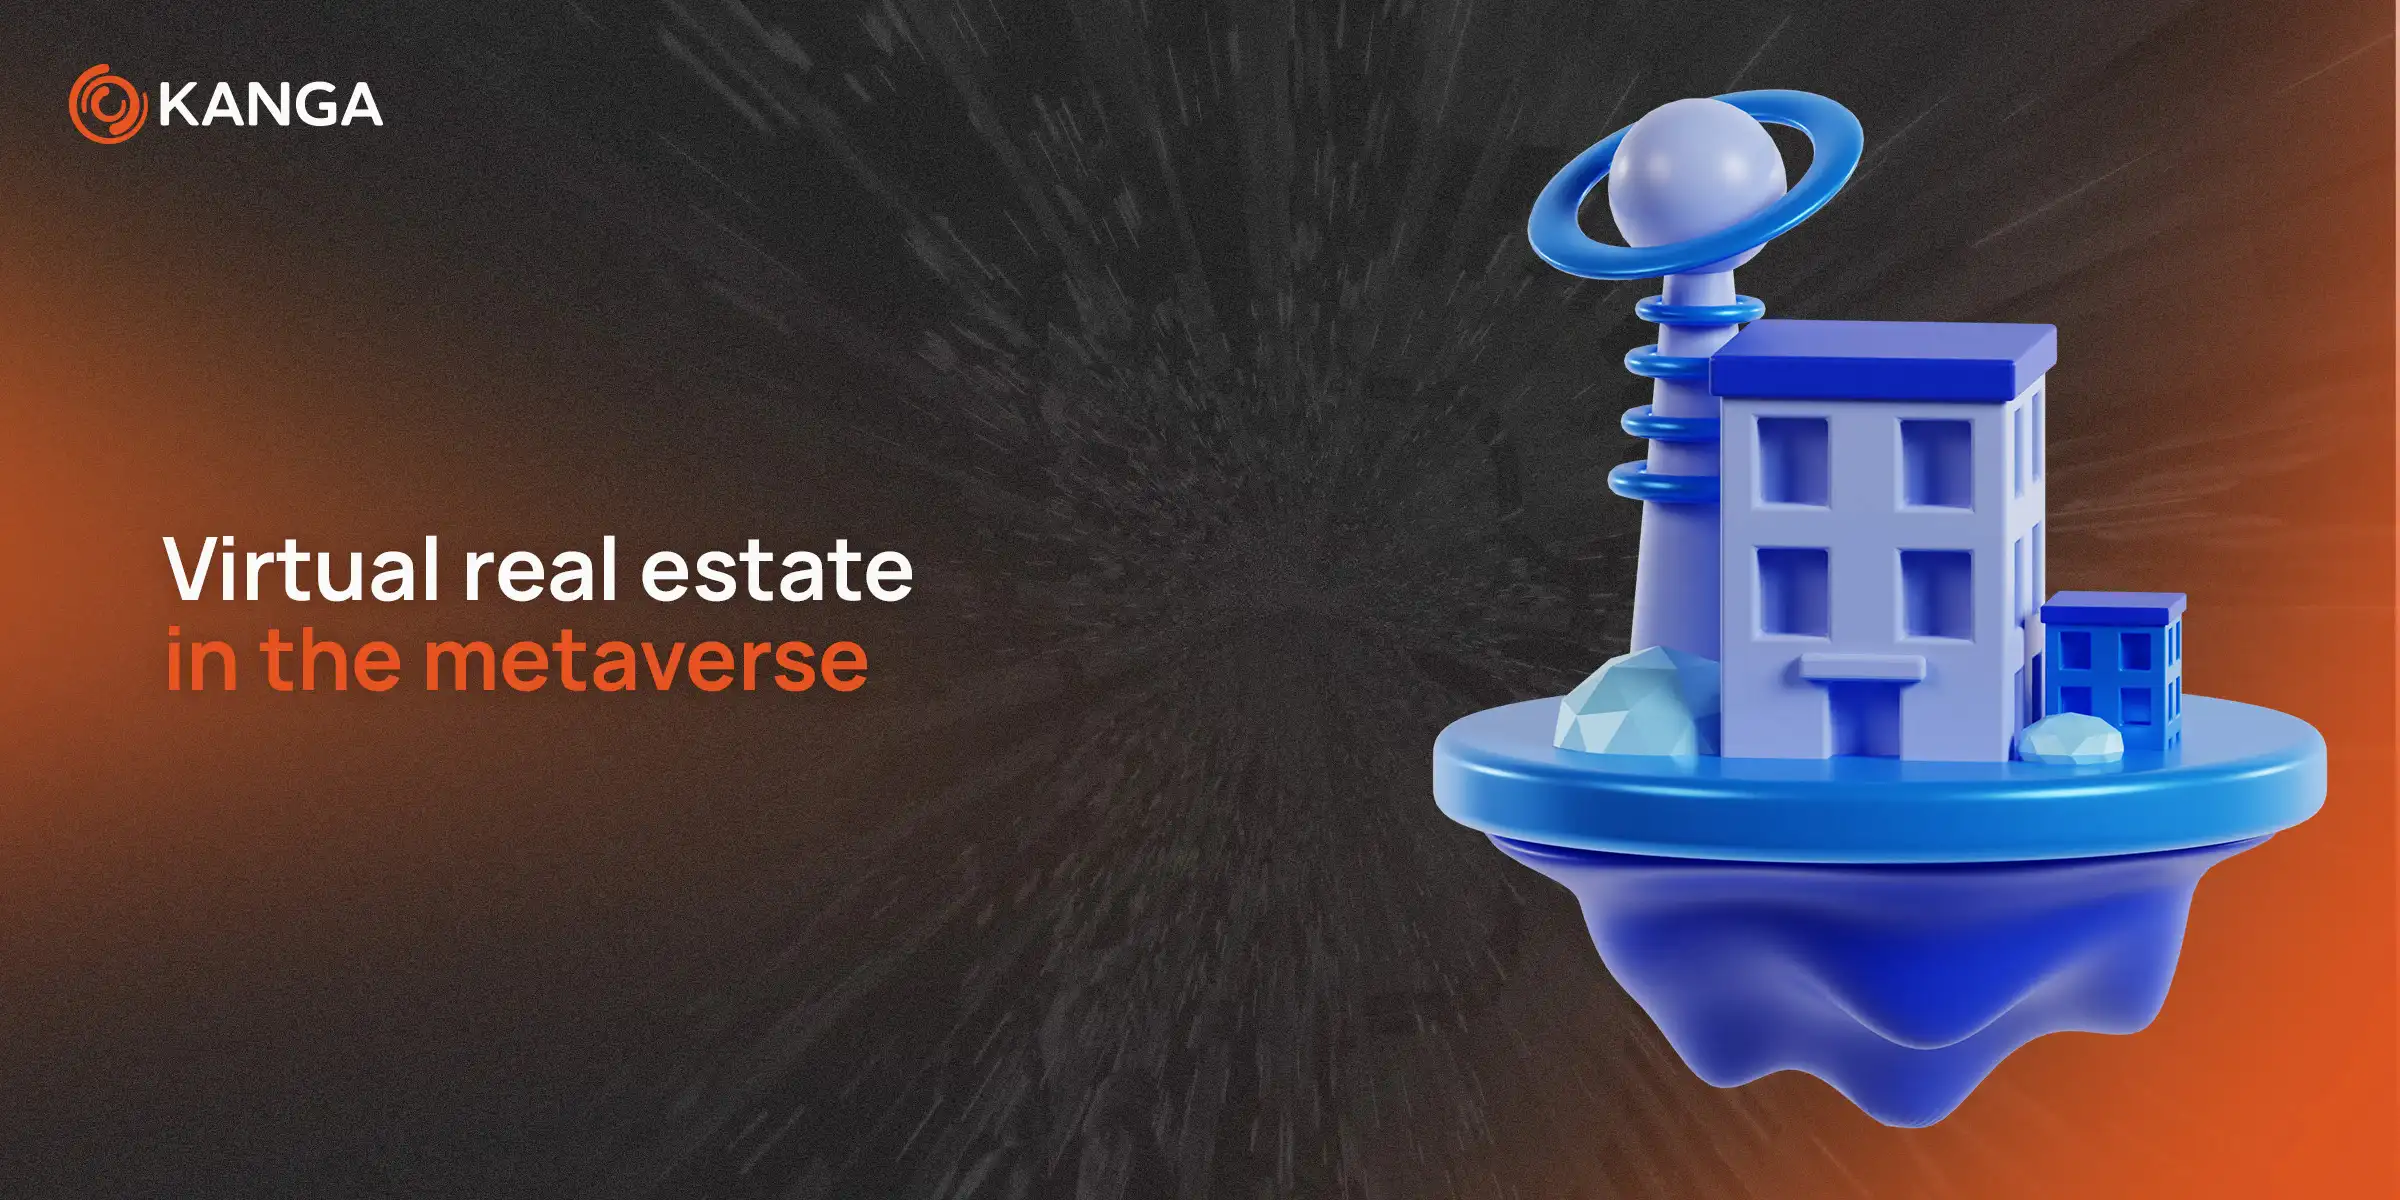 Virtual real estate in the metaverse: a new era of investment